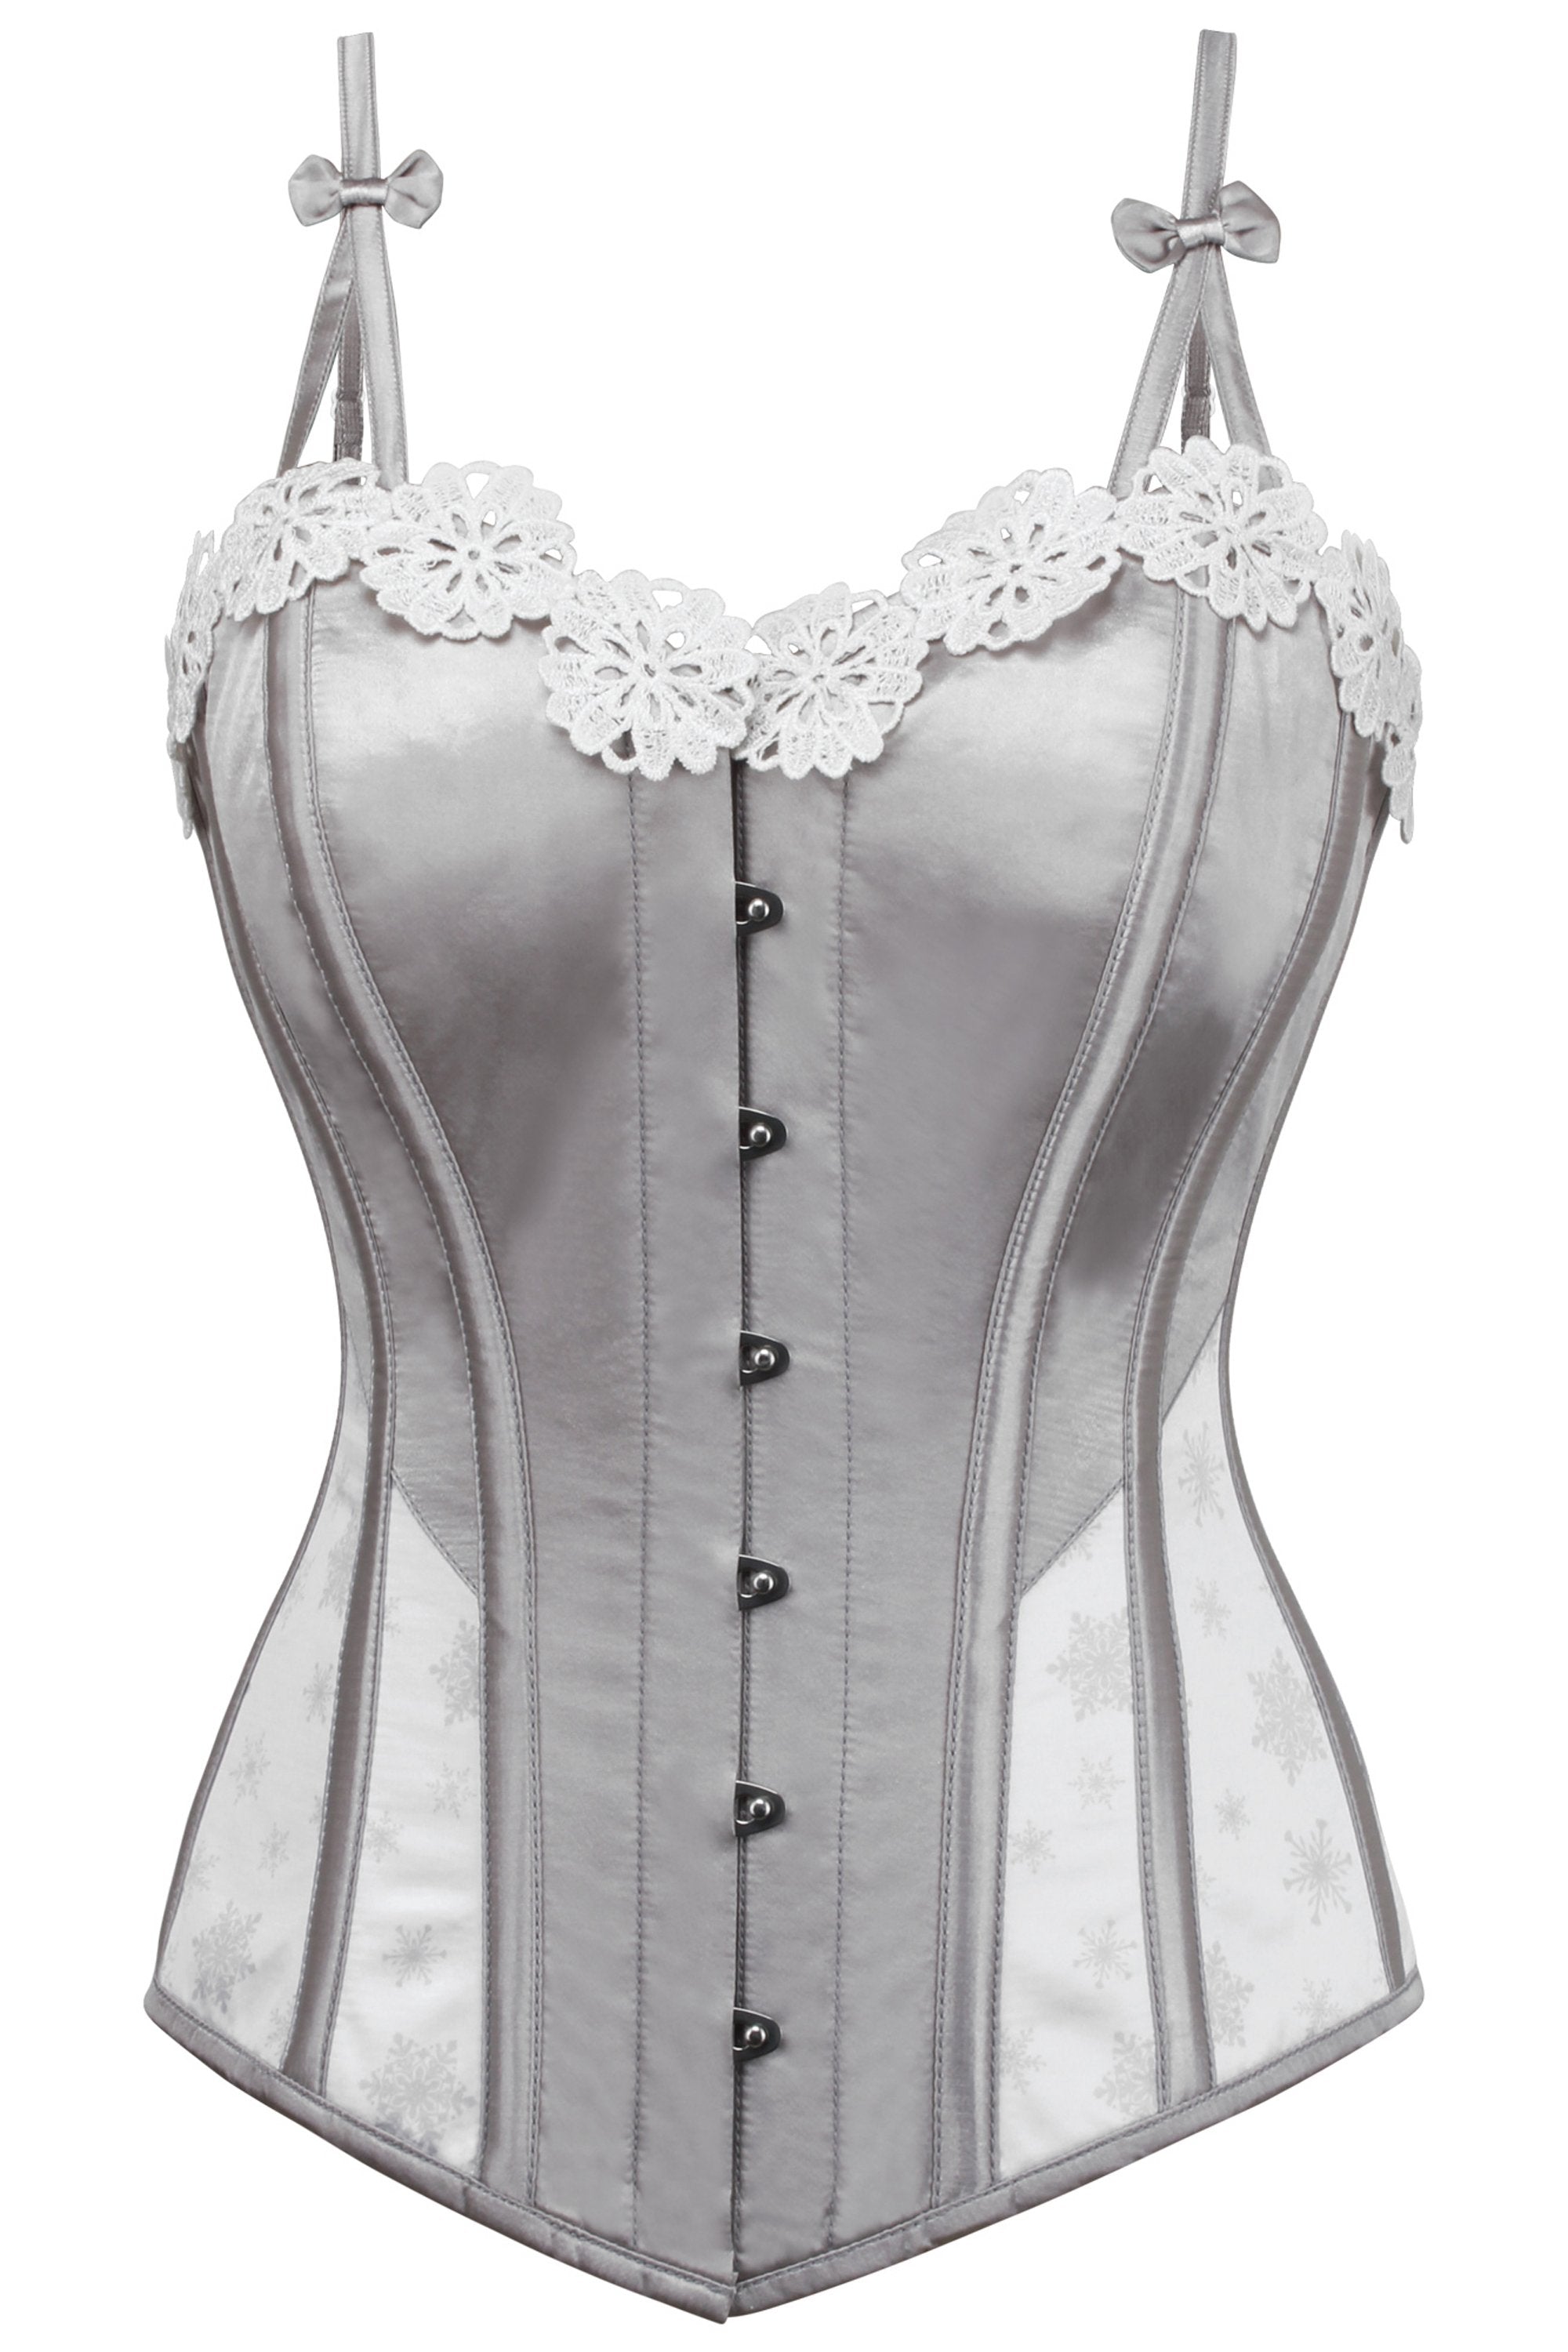 Historically Inspired Taupe Green Longline Corset with Lace Trim